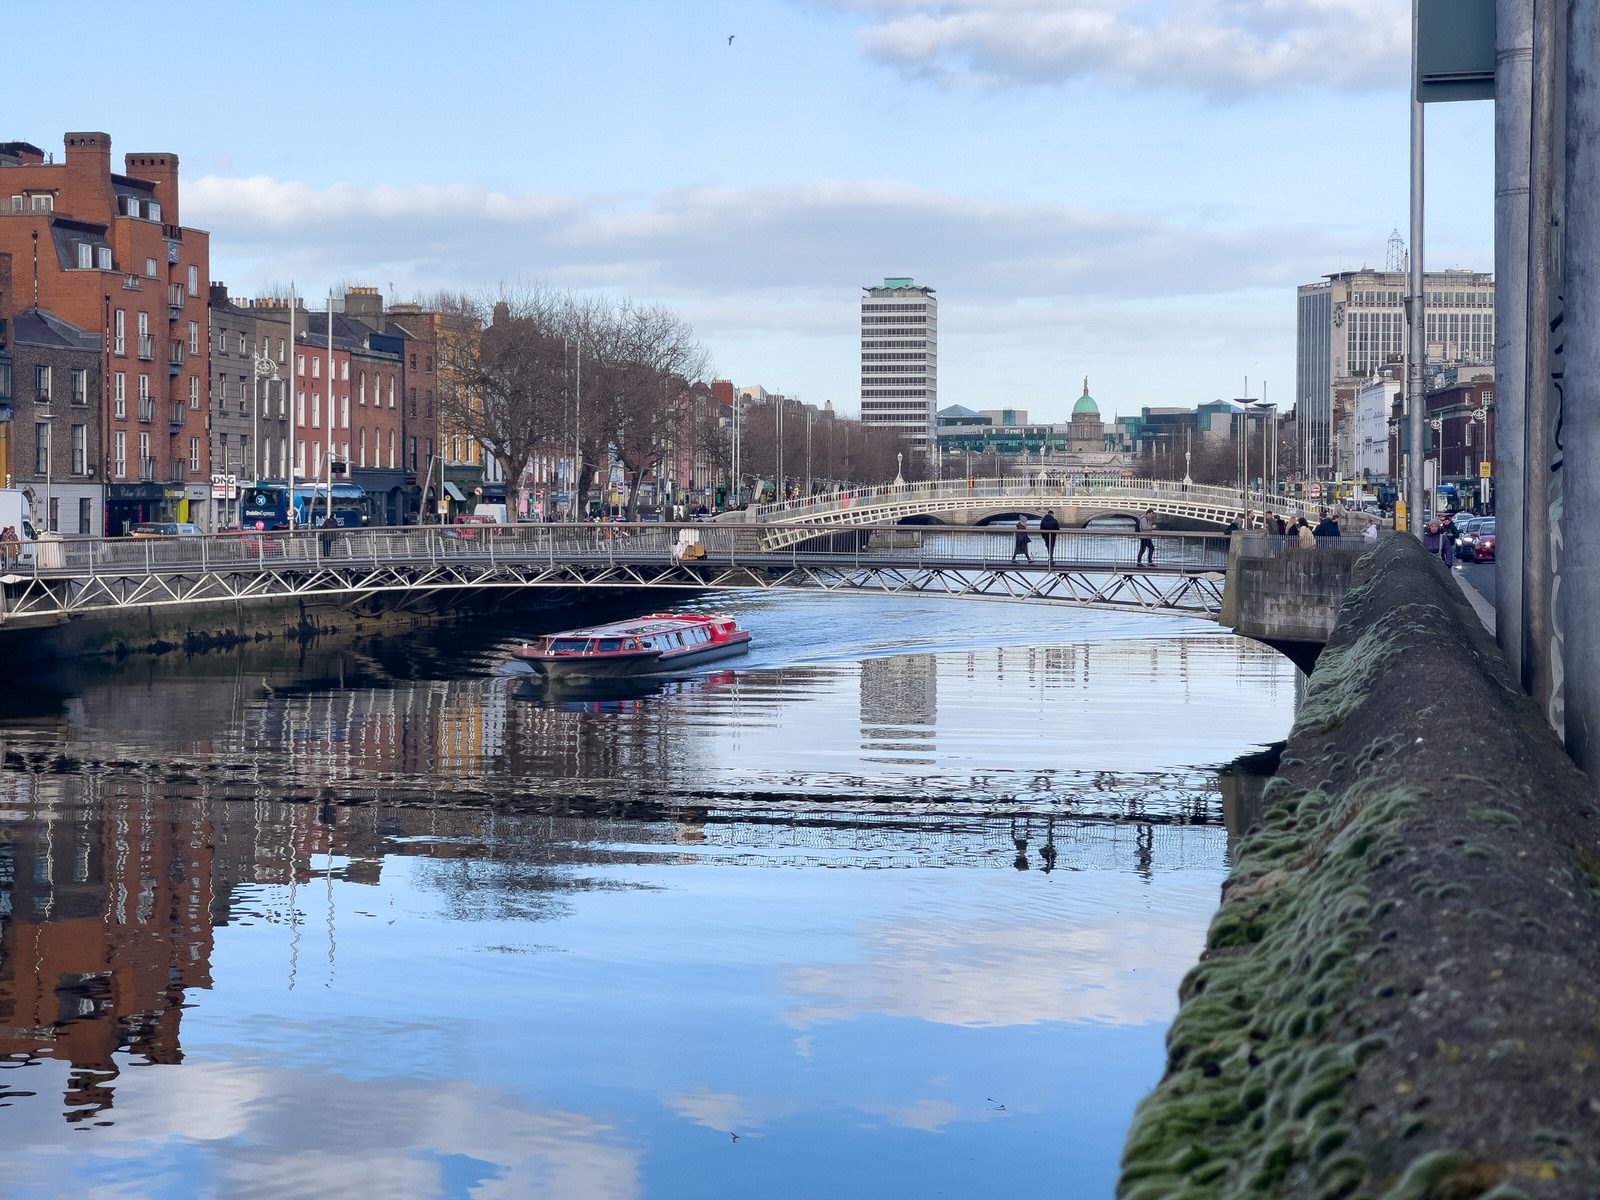 I HAD NOTHING BETTER TO DO [SO I PHOTOGRAPHED THE SPIRIT OF THE DOCKLANDS TURNING ON THE RIVER LIFFEY]-229434-1